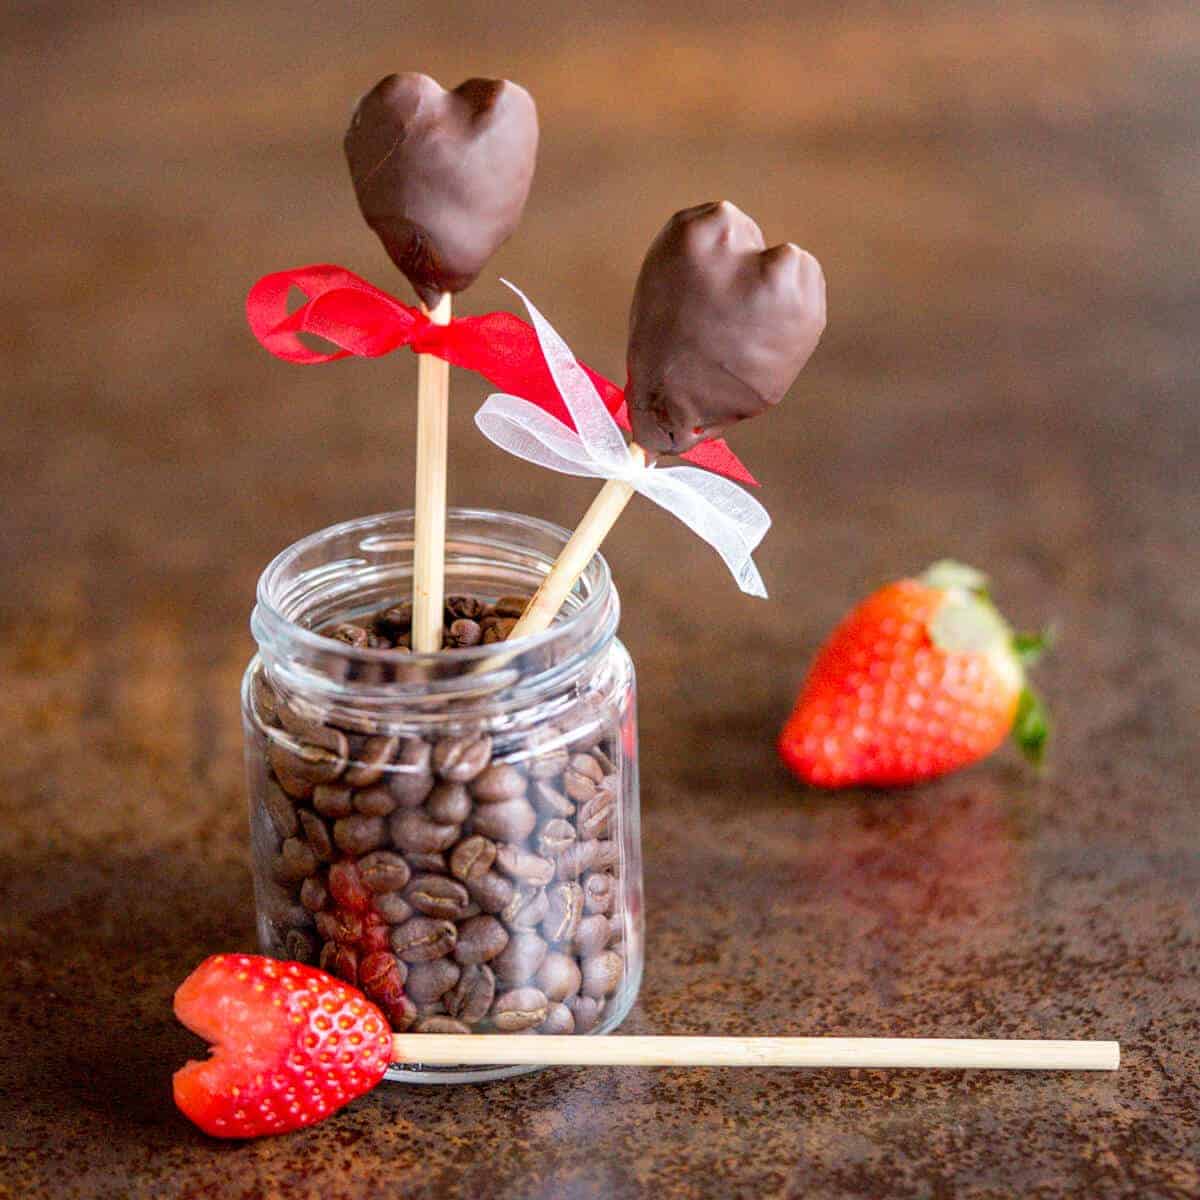 two chocolate-covered strawberry hearts in a jar next to a whole strawberry and a heart-shaped strawberry on a skewer ready for dipping in chocolate.